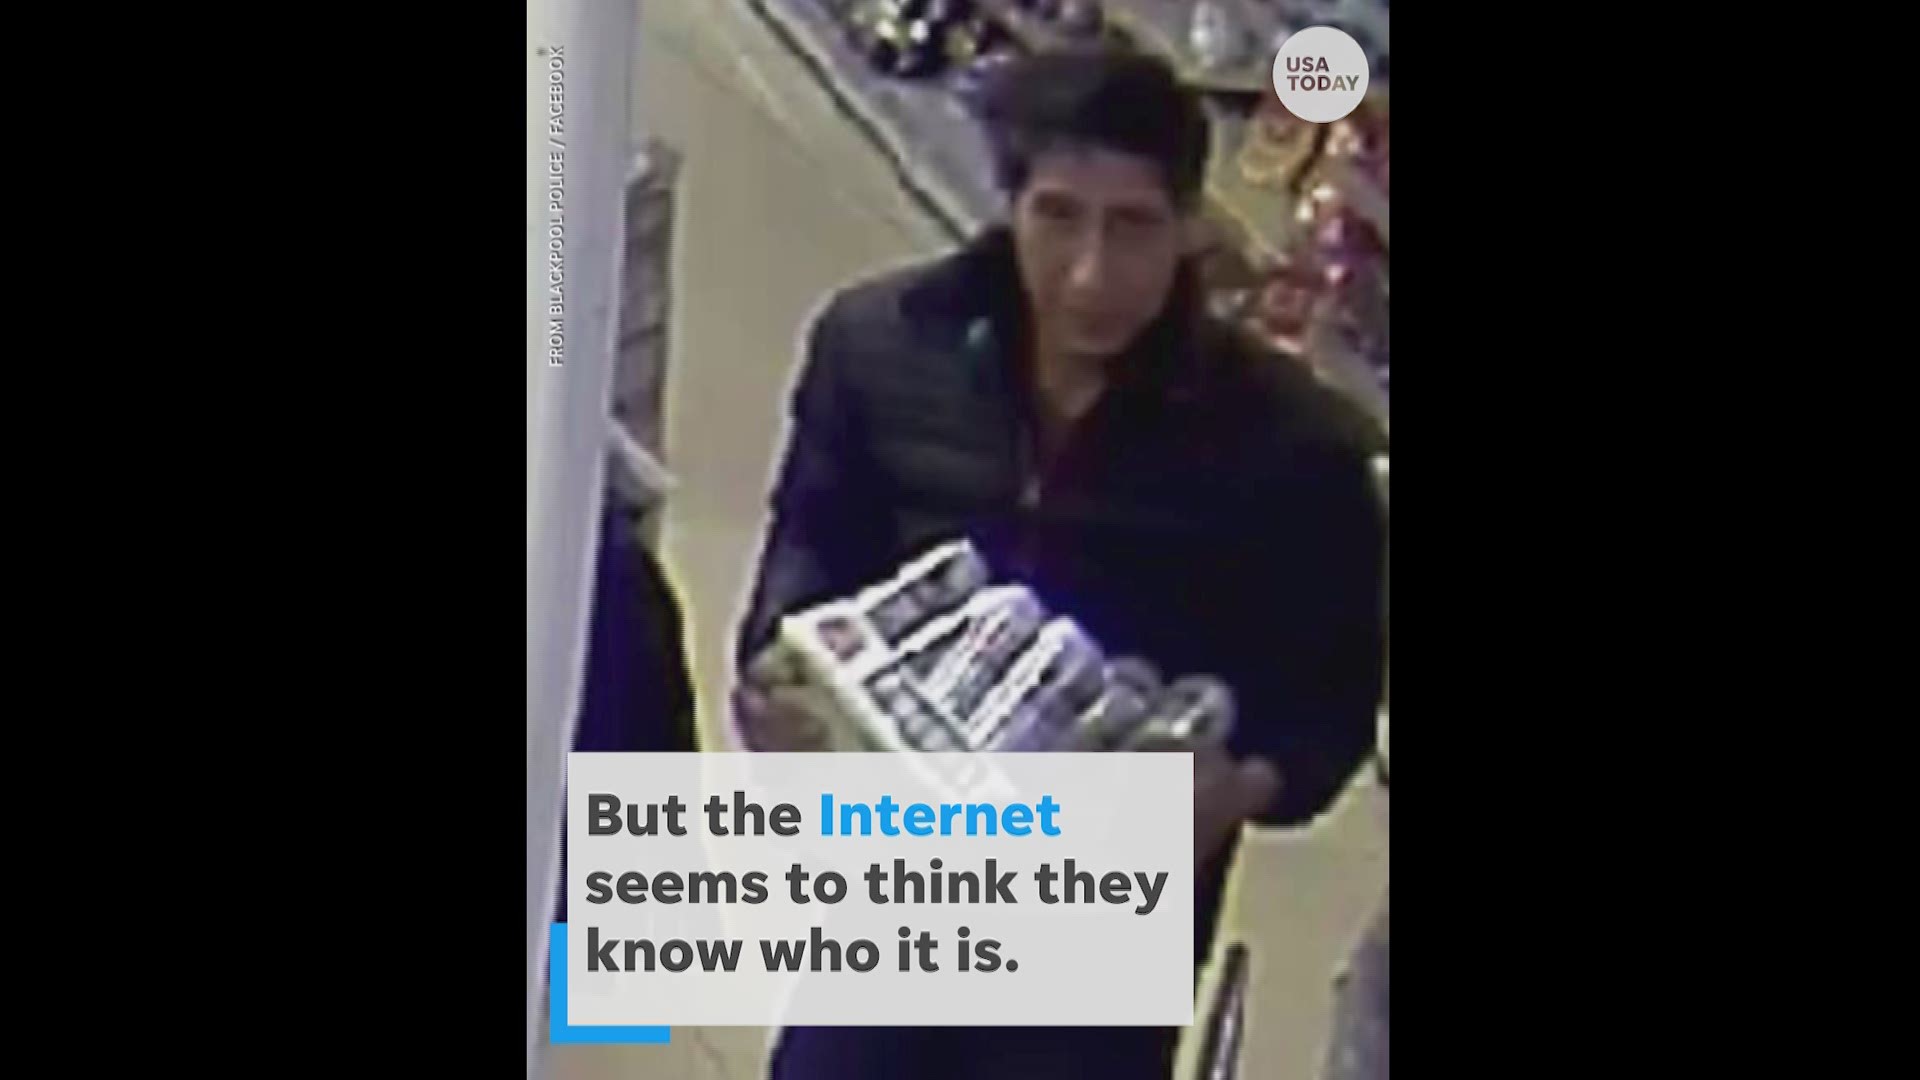 No, that wasn't "Friends" actor David Schwimmer stealing beer from a restaurant in Blackpool, England on Oct. 20 but some fans seem to disagree. (USA TODAY)